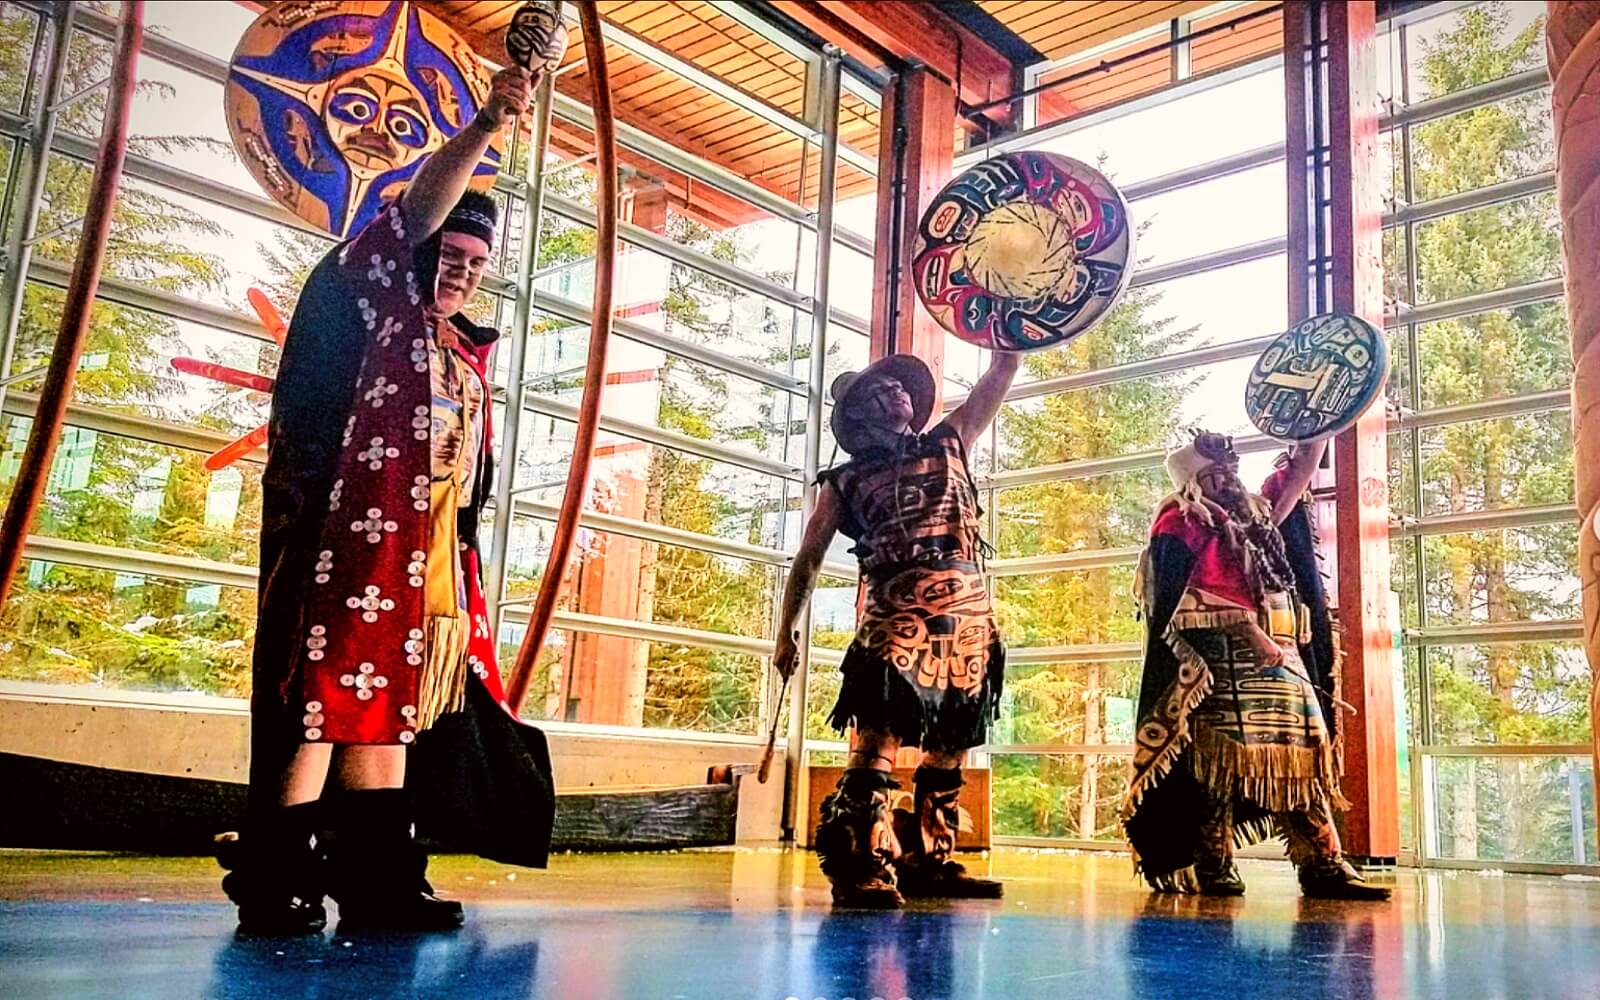 Traditional Squamish dancers at the slcc, Whistler